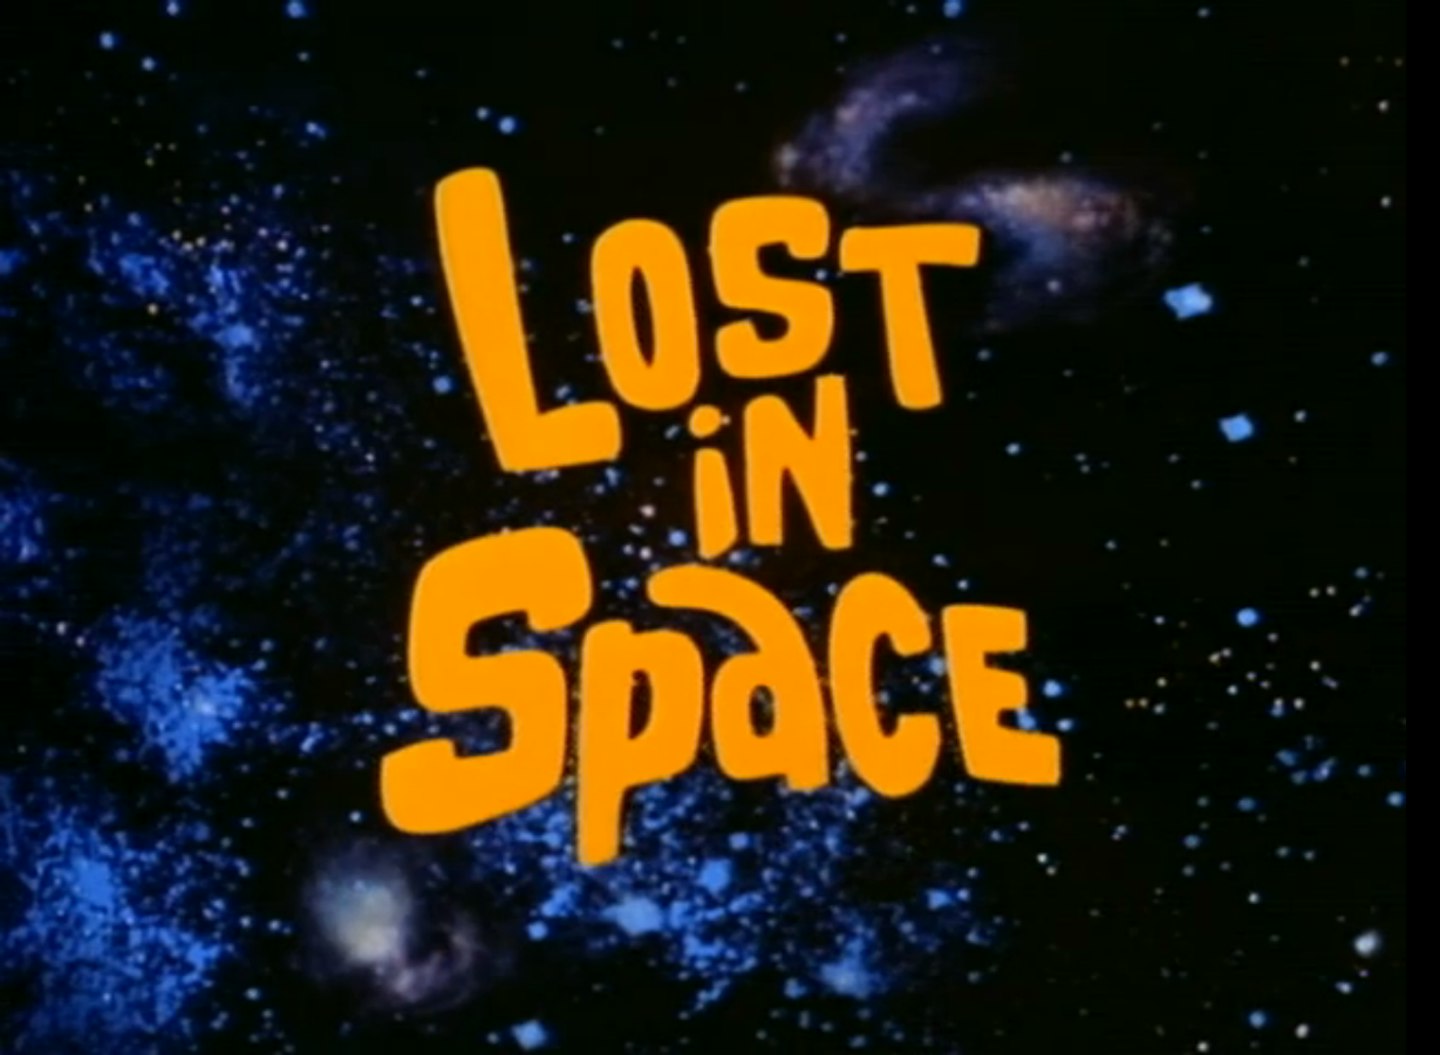 lost-in-space-logo